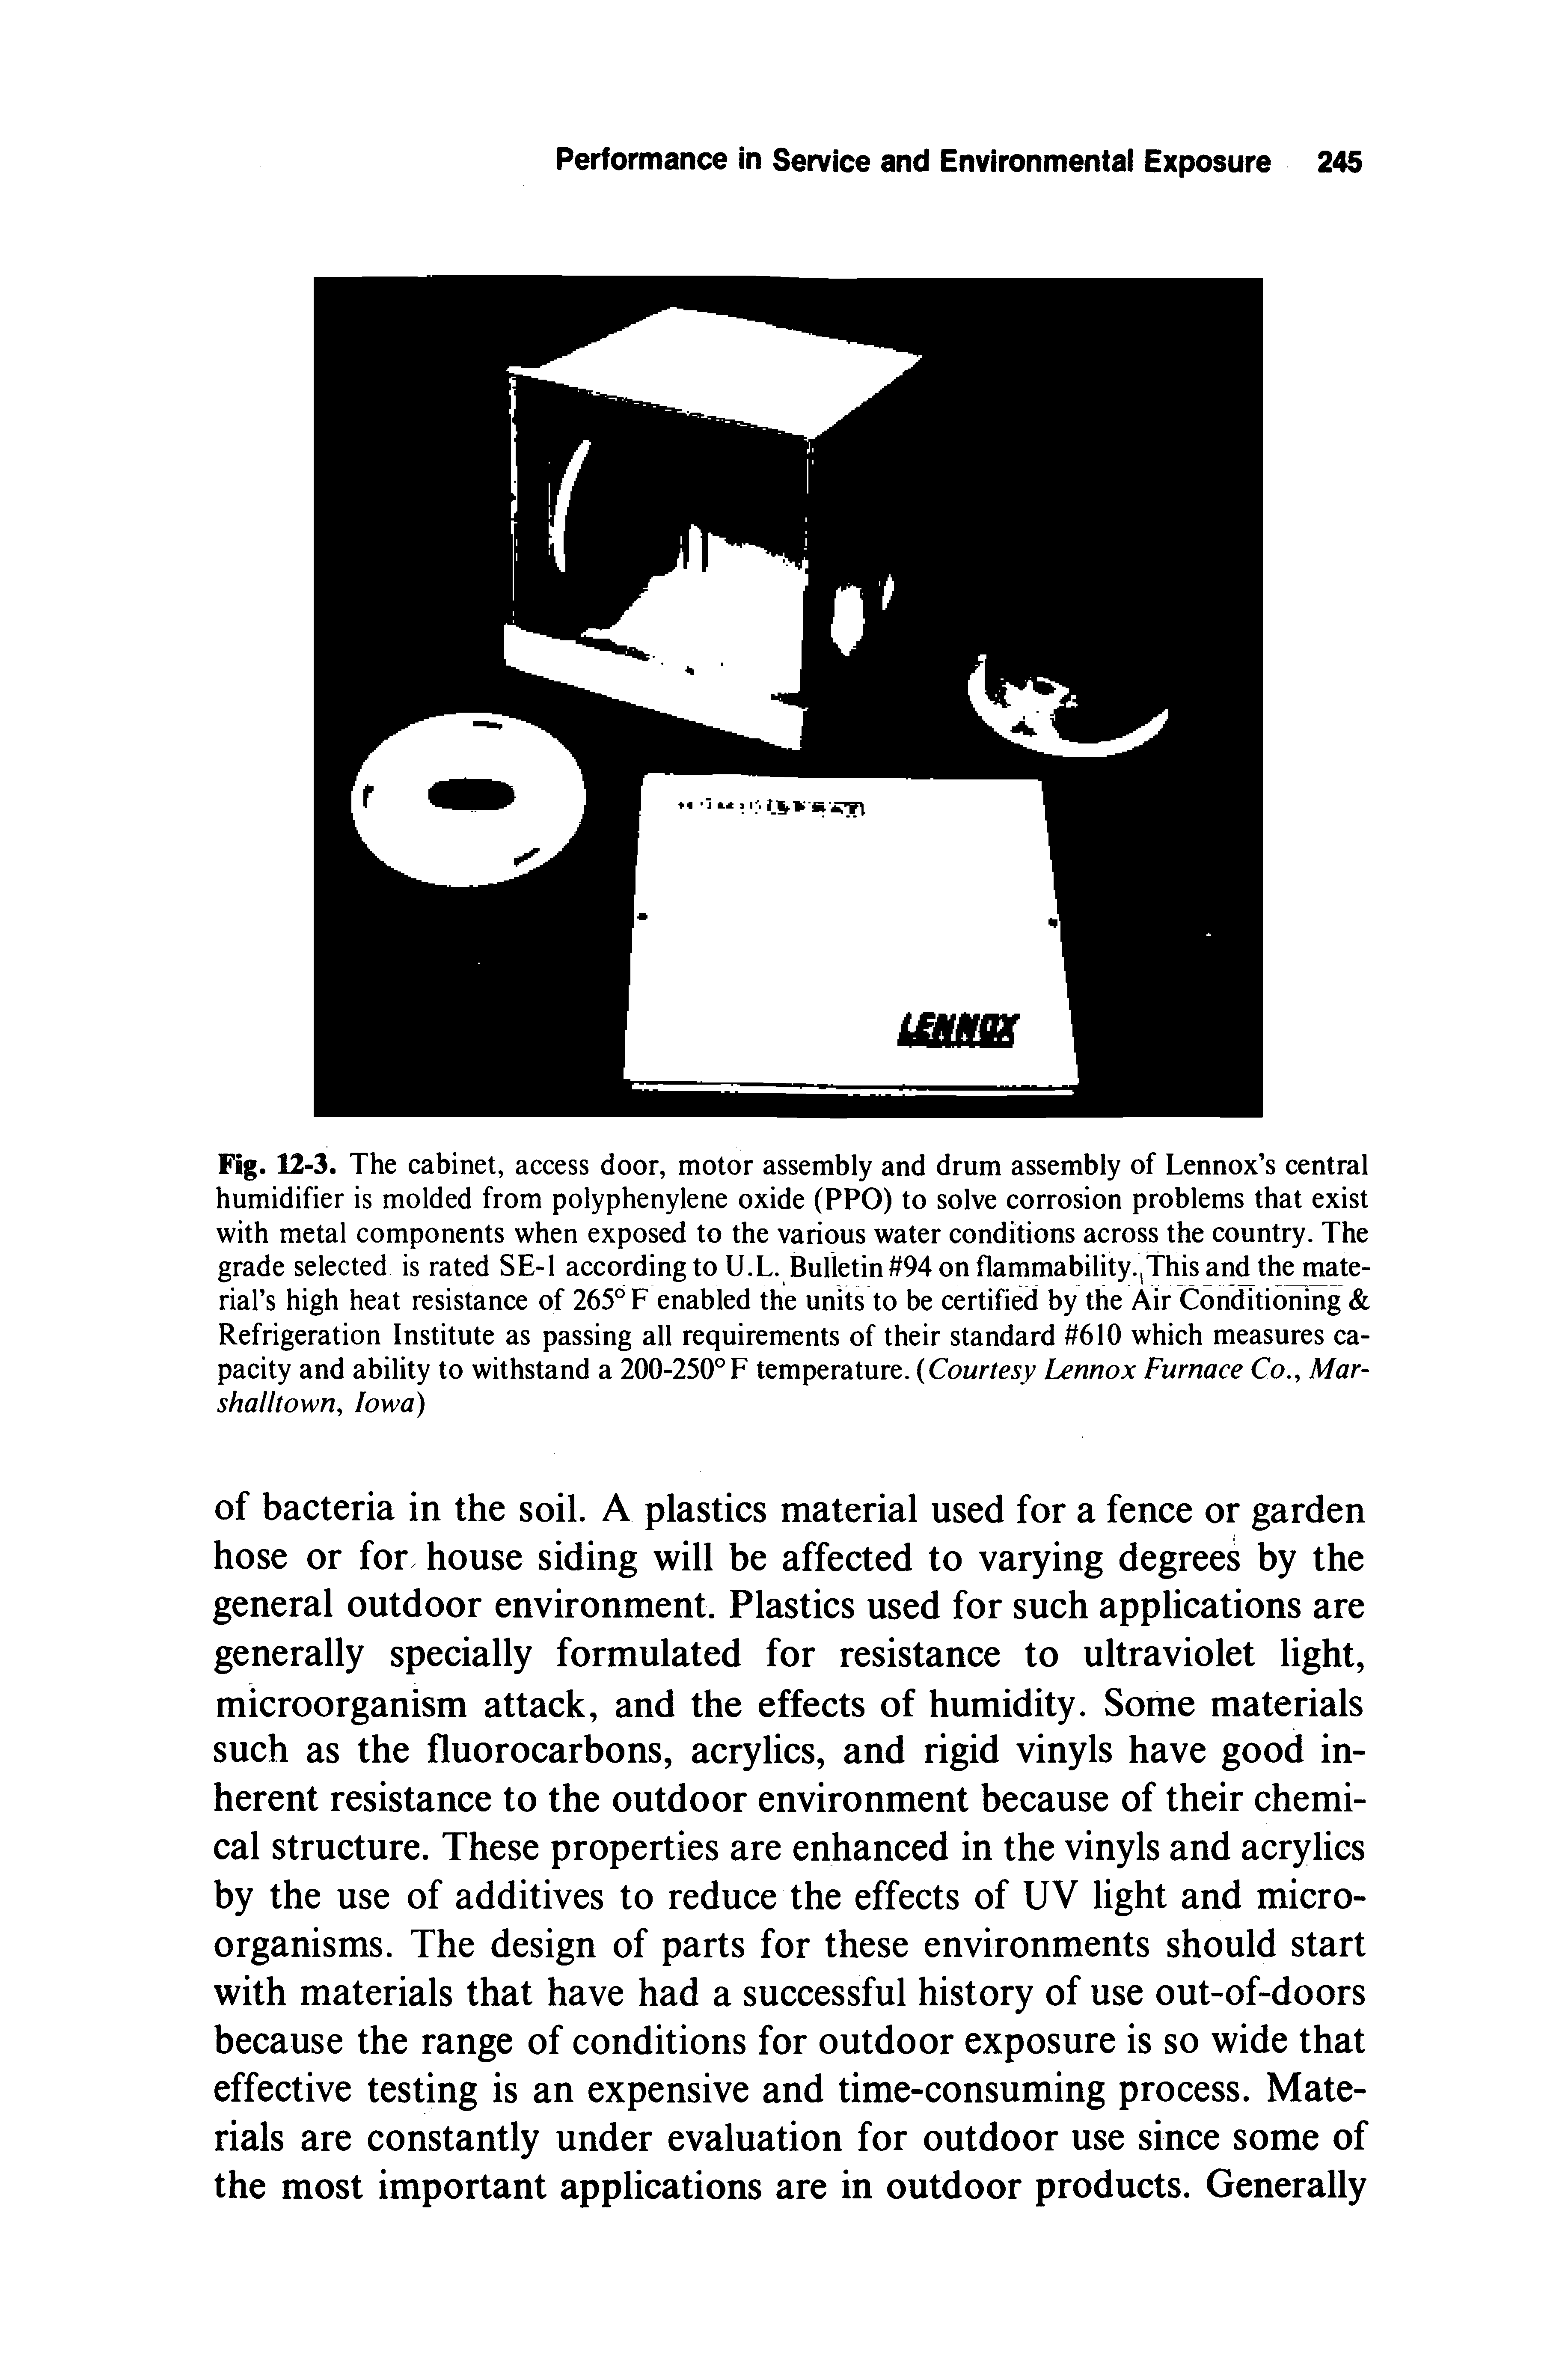 Fig. 12-3. The cabinet, access door, motor assembly and drum assembly of Lennox s central humidifier is molded from polyphenylene oxide (PPO) to solve corrosion problems that exist with metal components when exposed to the various water conditions across the country. The grade selected is rated SE-1 according to U.L. Bulletin 94 on flammability.,This and the material s high heat resistance of 265° F enabled the units to be certified by the Air Conditioning Refrigeration Institute as passing all requirements of their standard 610 which measures capacity and ability to withstand a 200-250°F temperature. (Courtesy Lennox Furnace Co. Mar-shalltown, Iowa)...